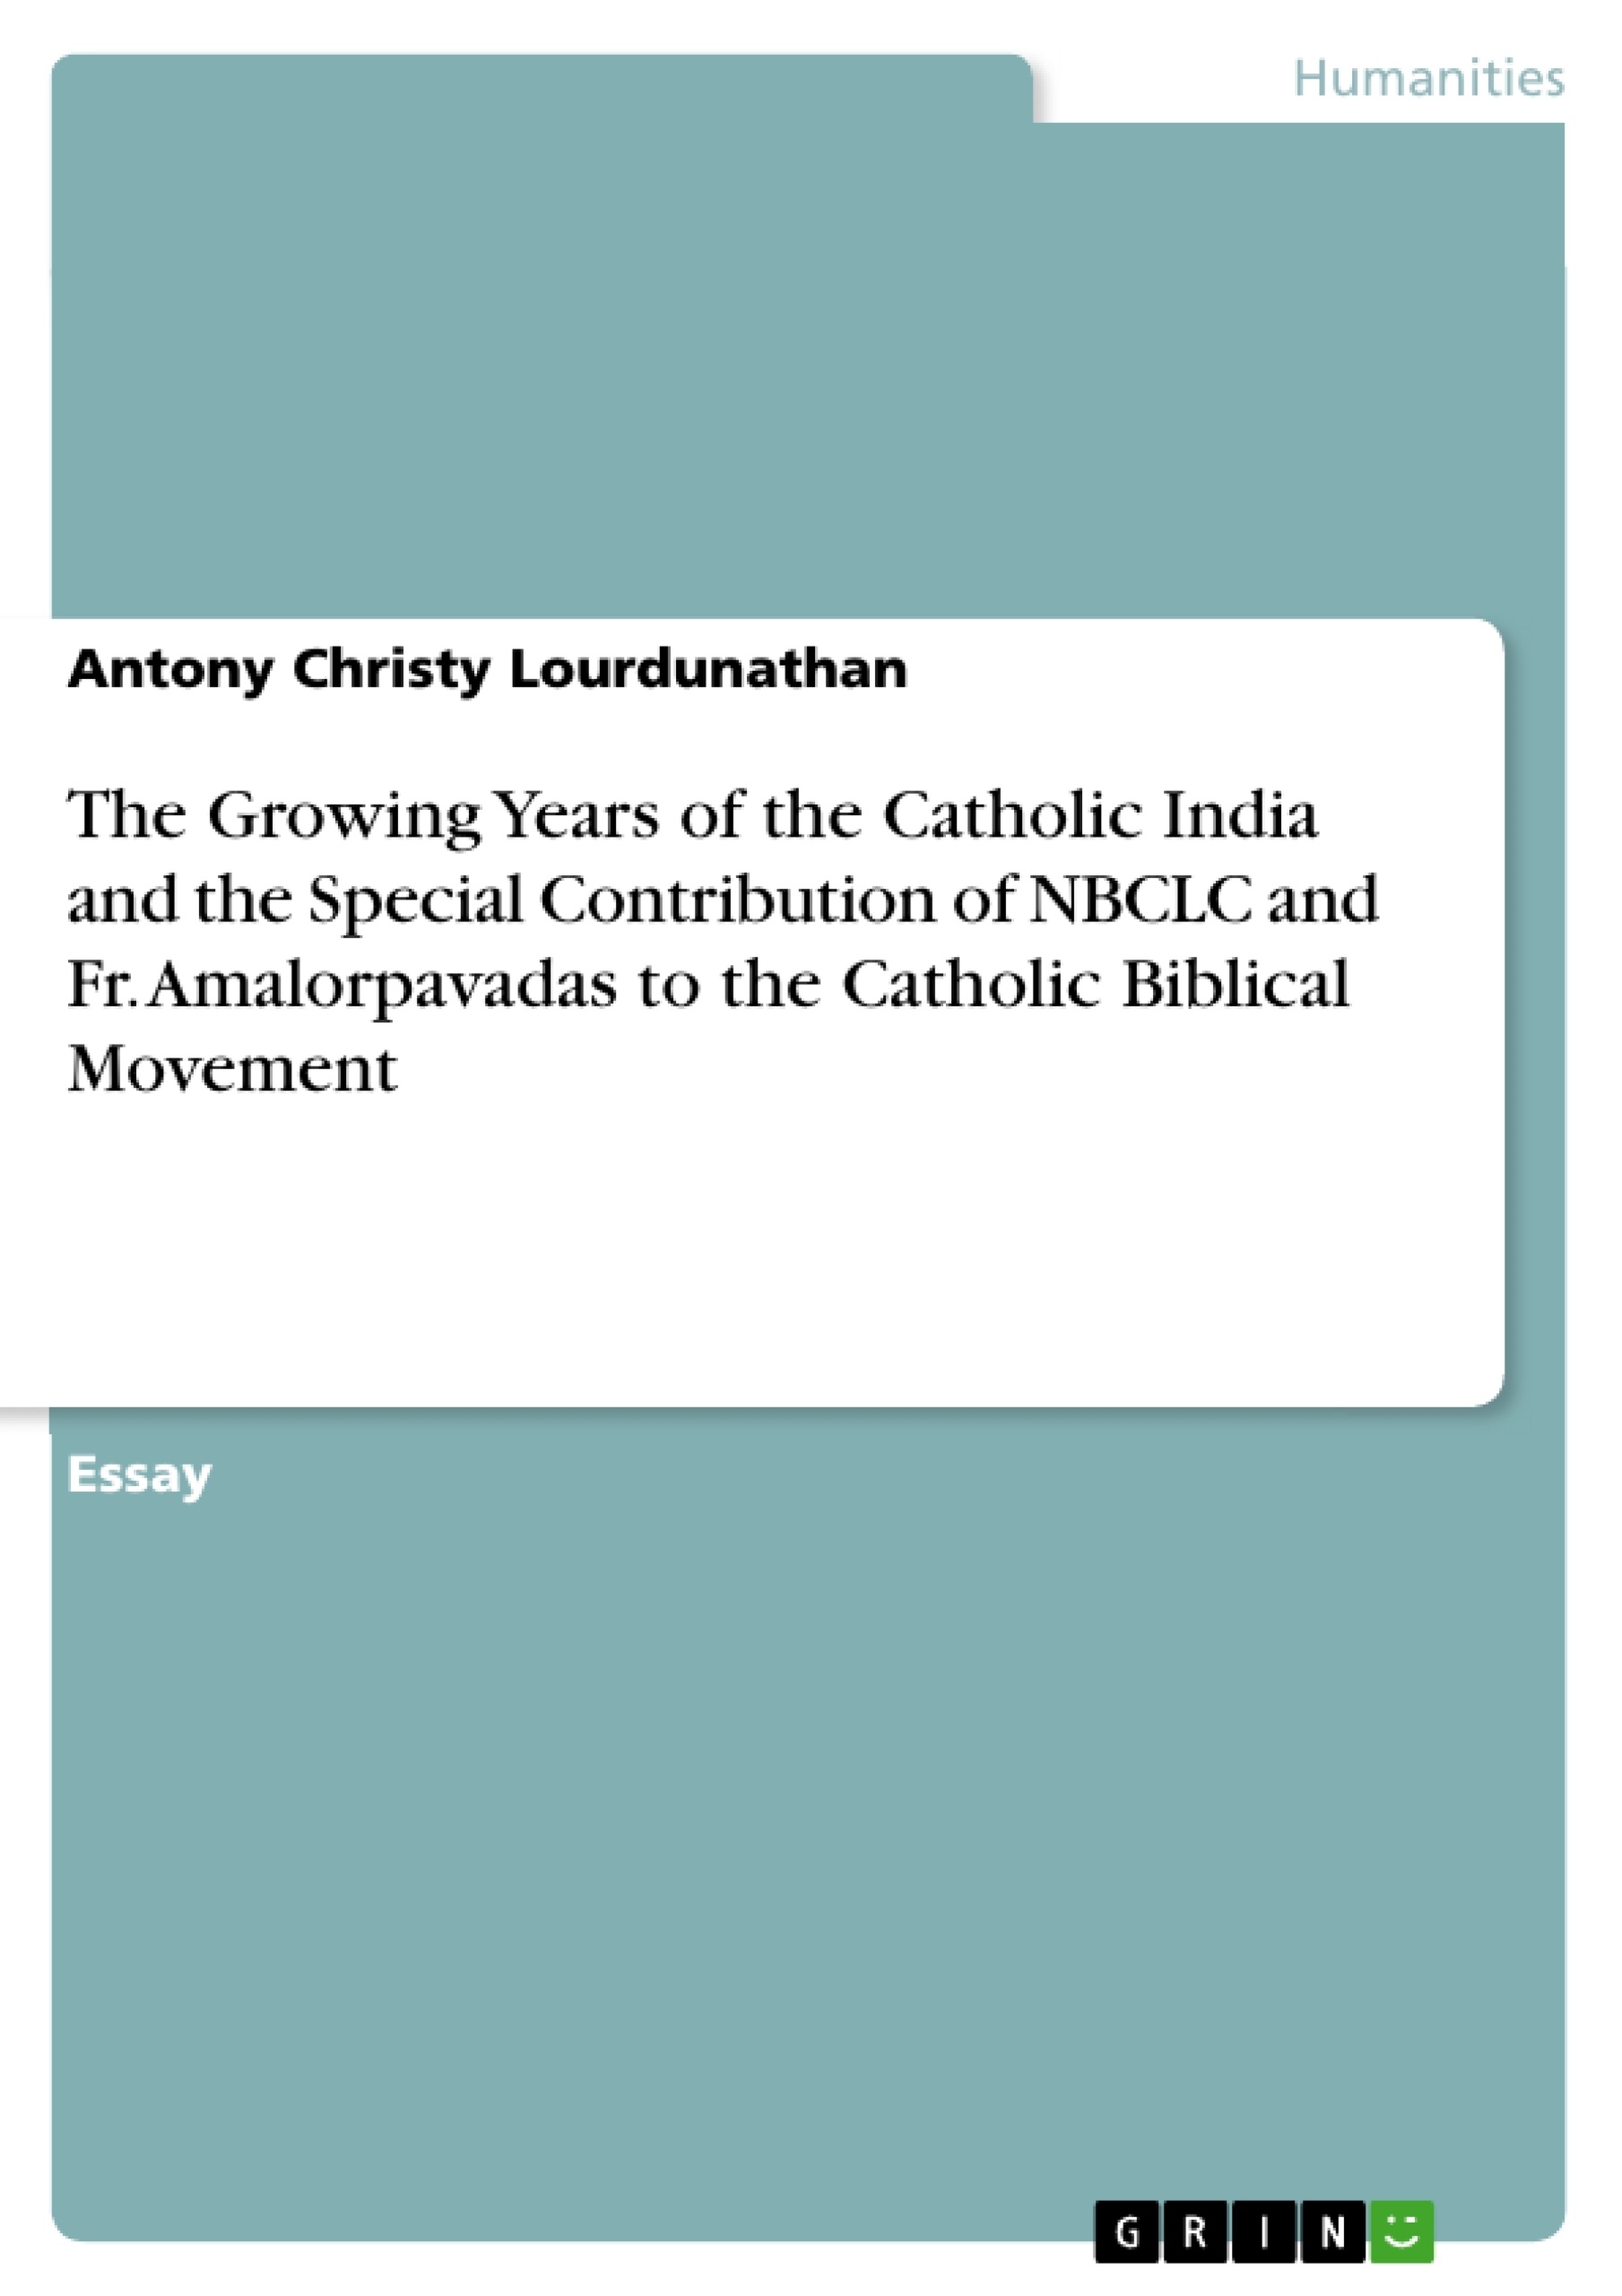 Título: The Growing Years of the Catholic India and the Special Contribution of NBCLC and Fr. Amalorpavadas to the Catholic Biblical Movement